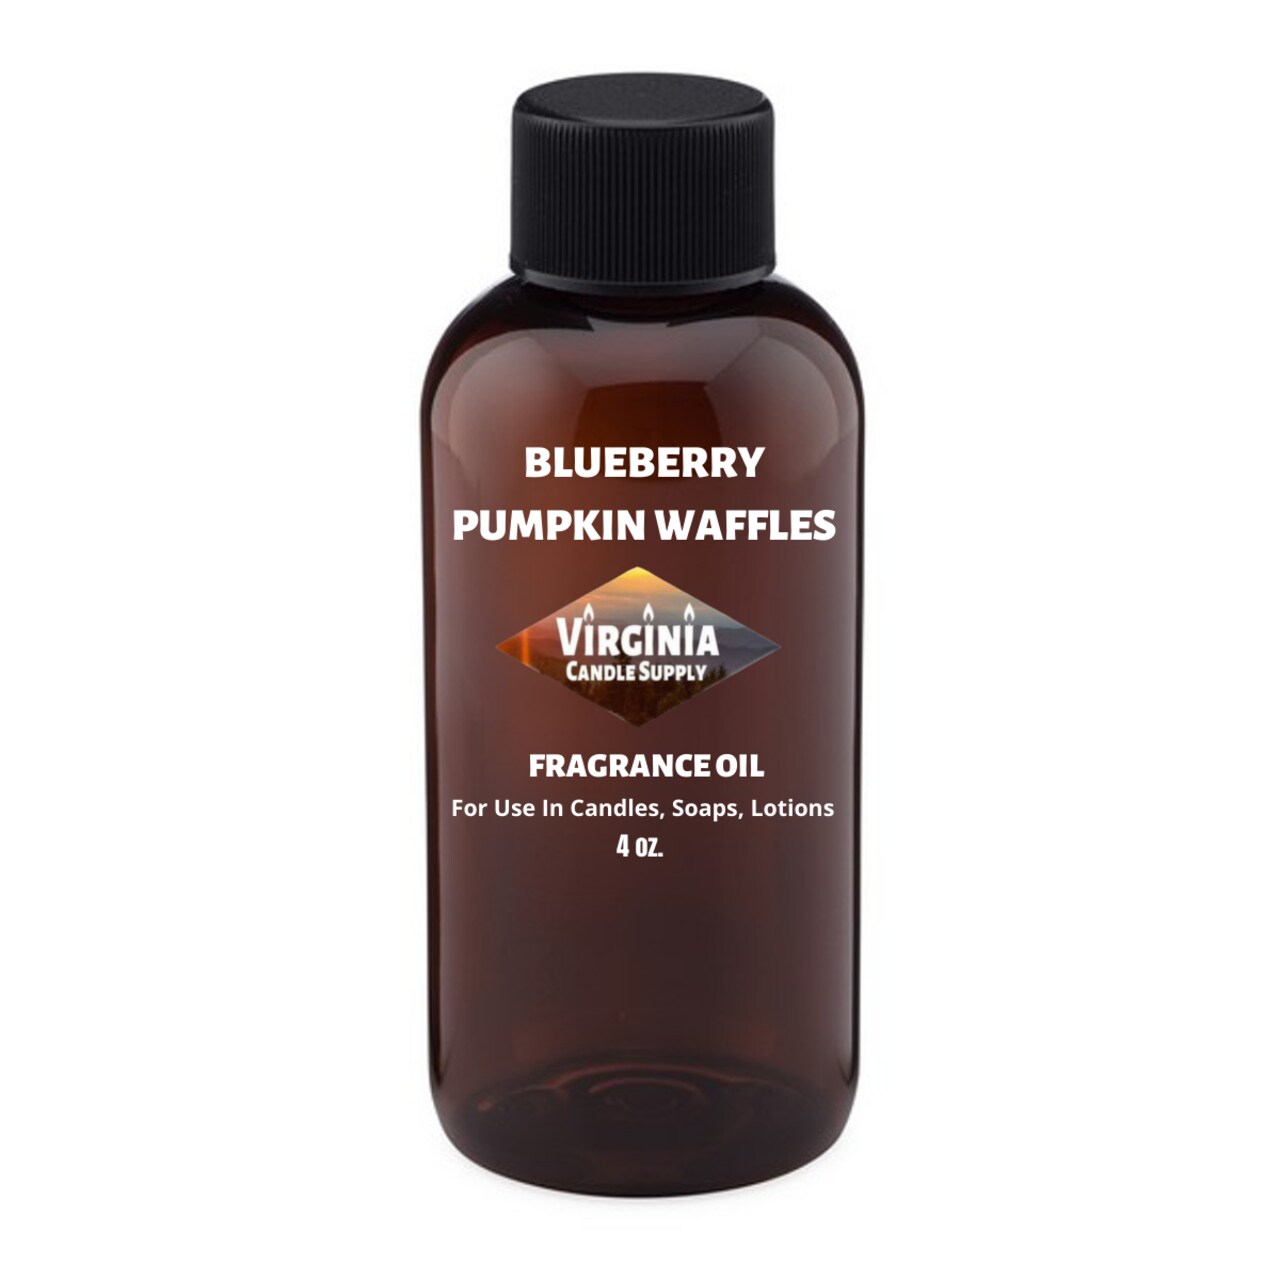 Blueberry Pumpkin Waffle Fragrance Oil (Our Version of the Brand Name) (4 oz Bottle) for Candle Making, Soap Making, Tart Making, Room Sprays, Lotions, Car Fresheners, Slime, Bath Bombs, Warmers&#x2026;